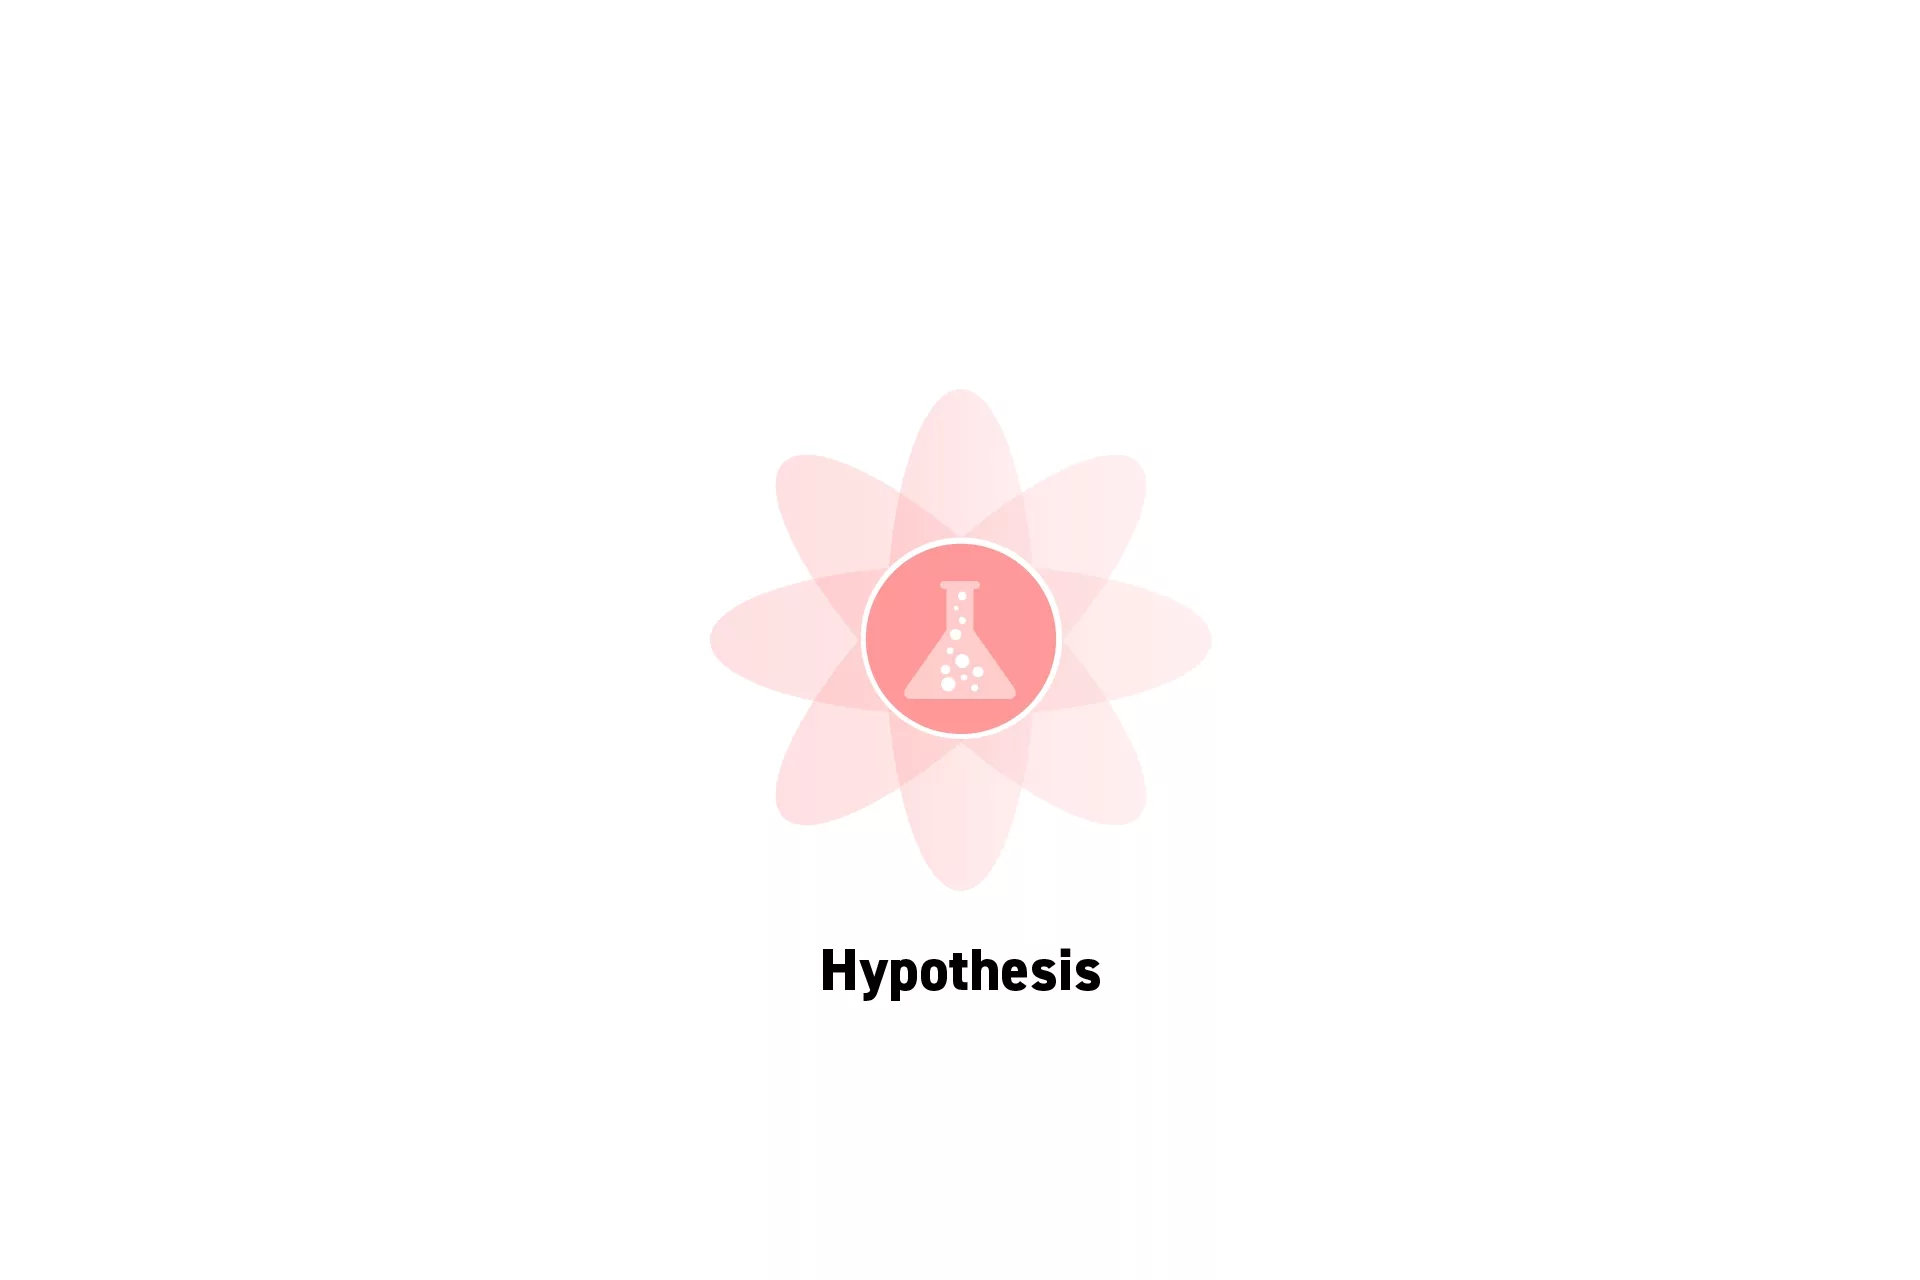 A flower that represents Strategy with the text “Hypothesis” beneath it.